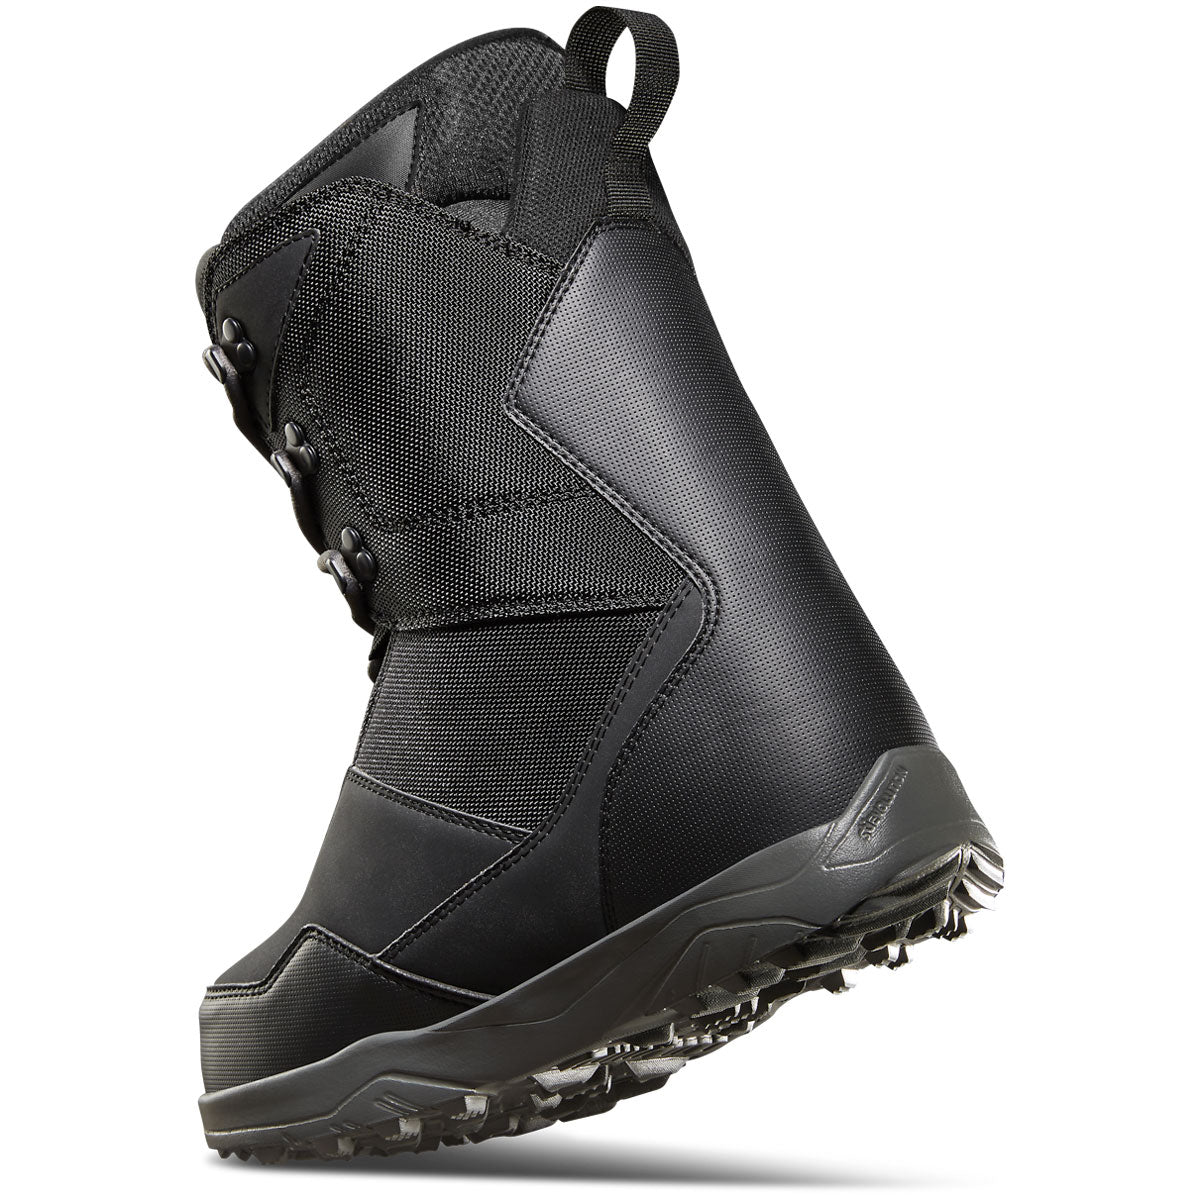 Thirty Two Shifty Snowboard Boots - Black image 2